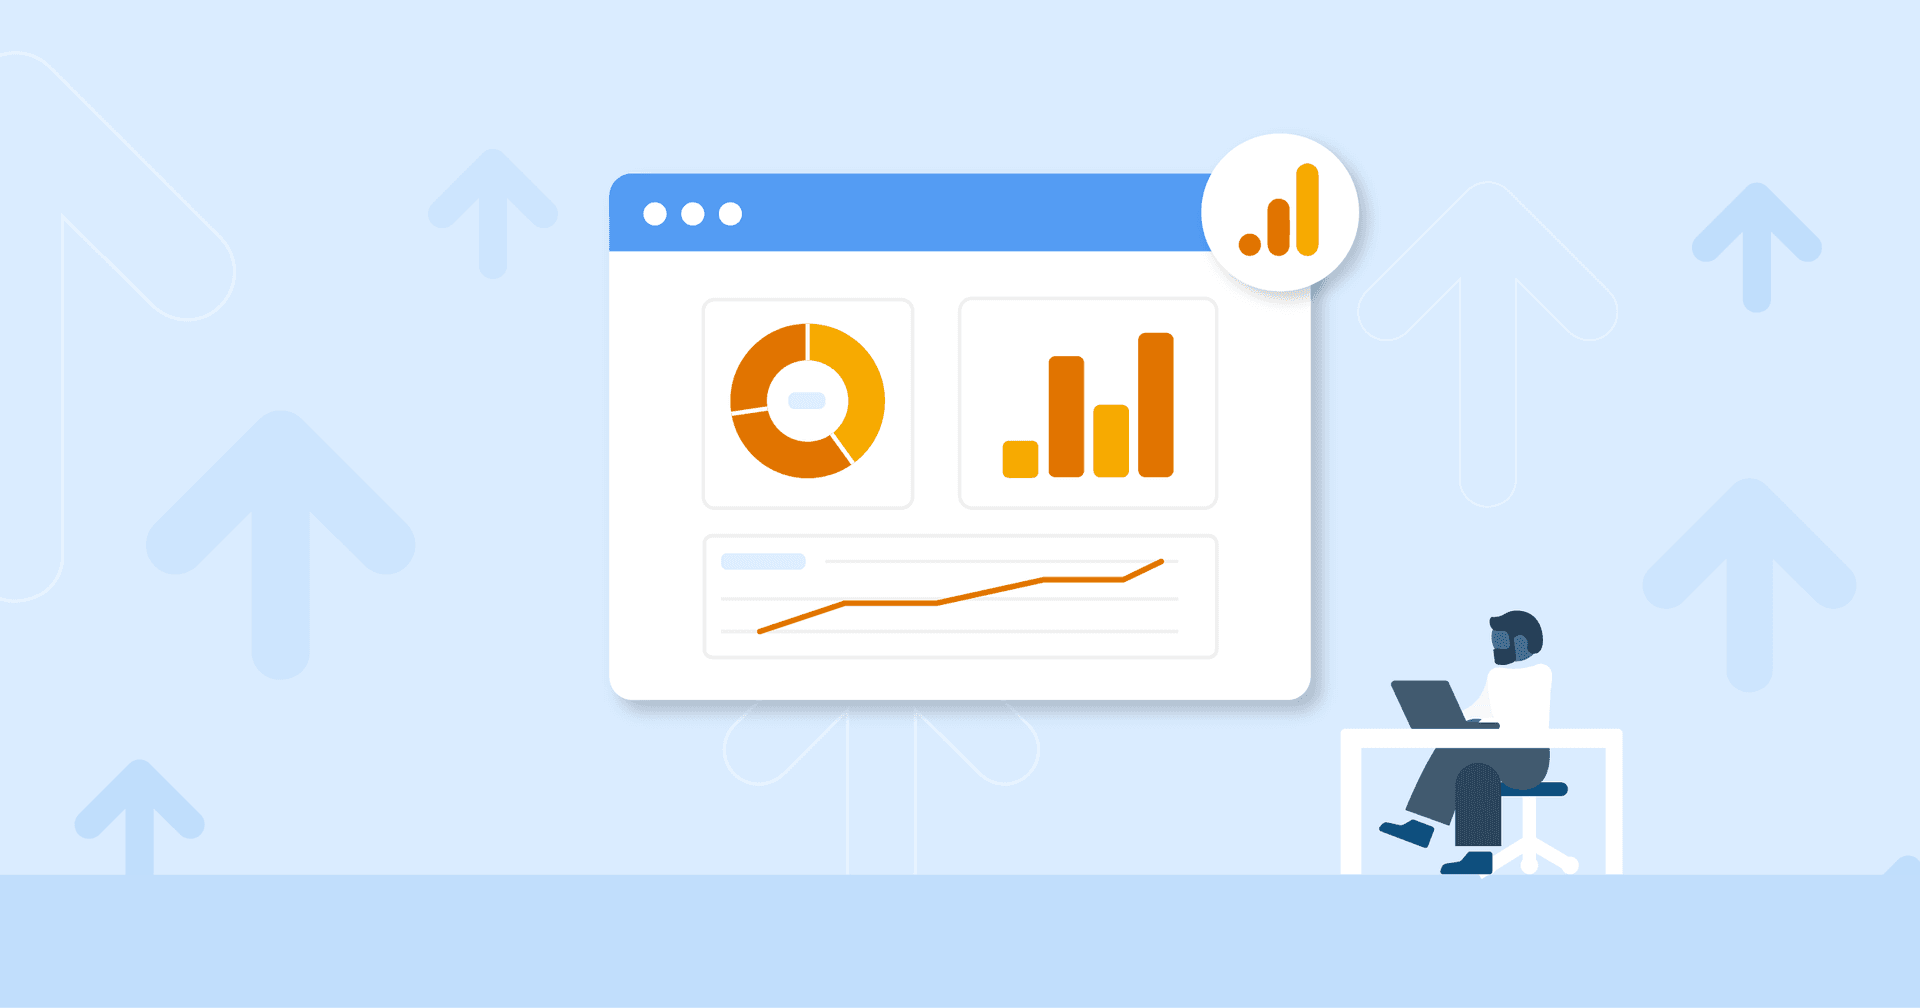 How to Create Better Google Analytics Client Reports